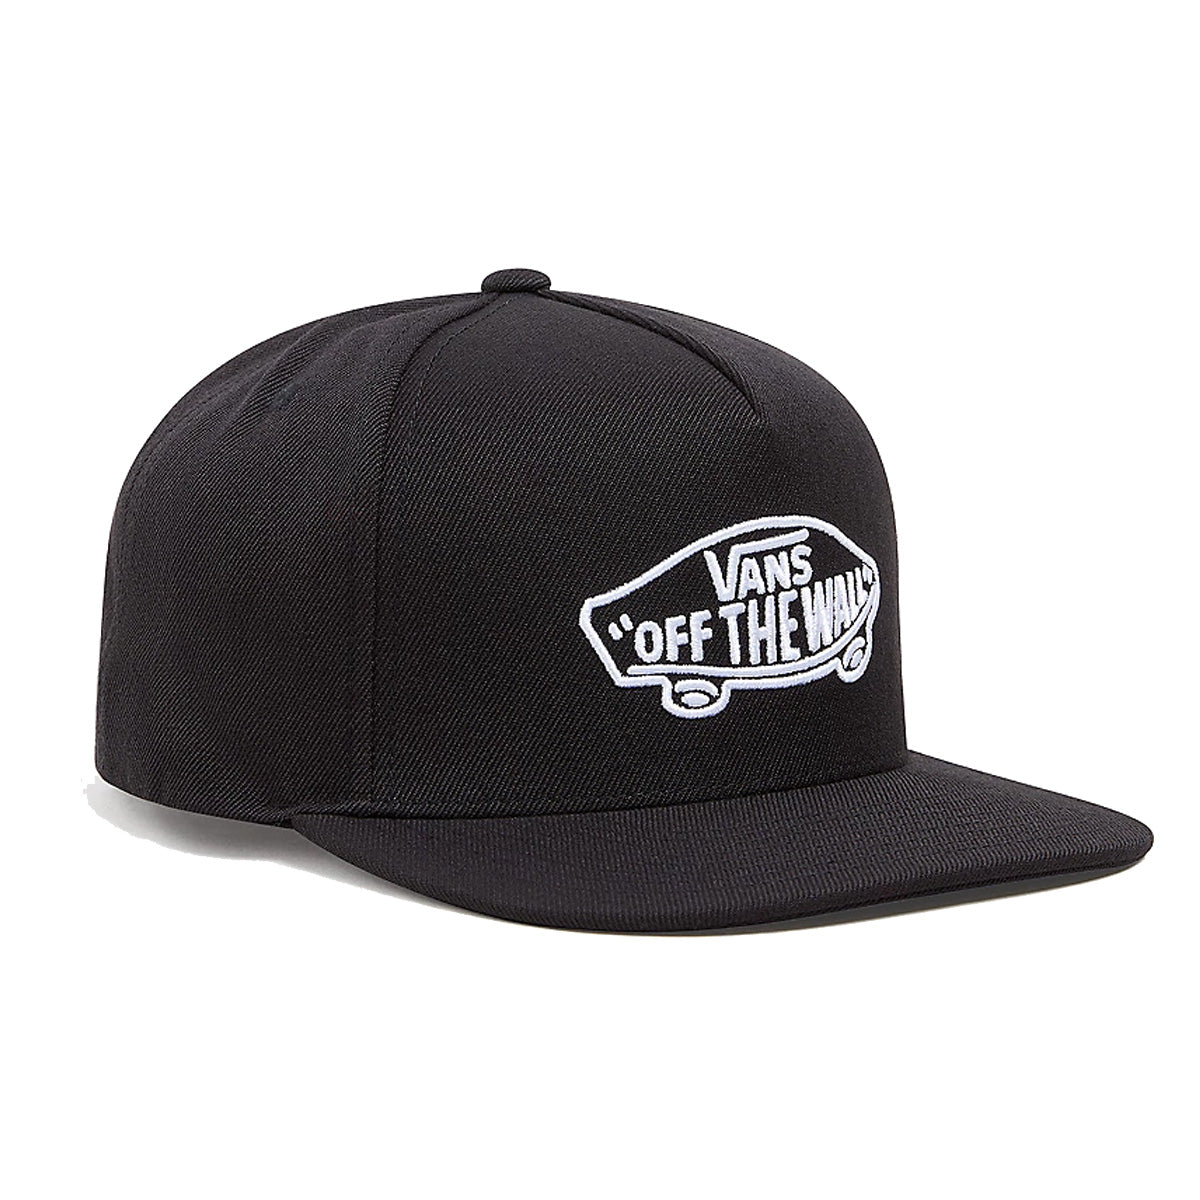 Black vans six panel cap with white vans “off the wall” logo on front and adjustable strap on back. Free uk shipping over £50